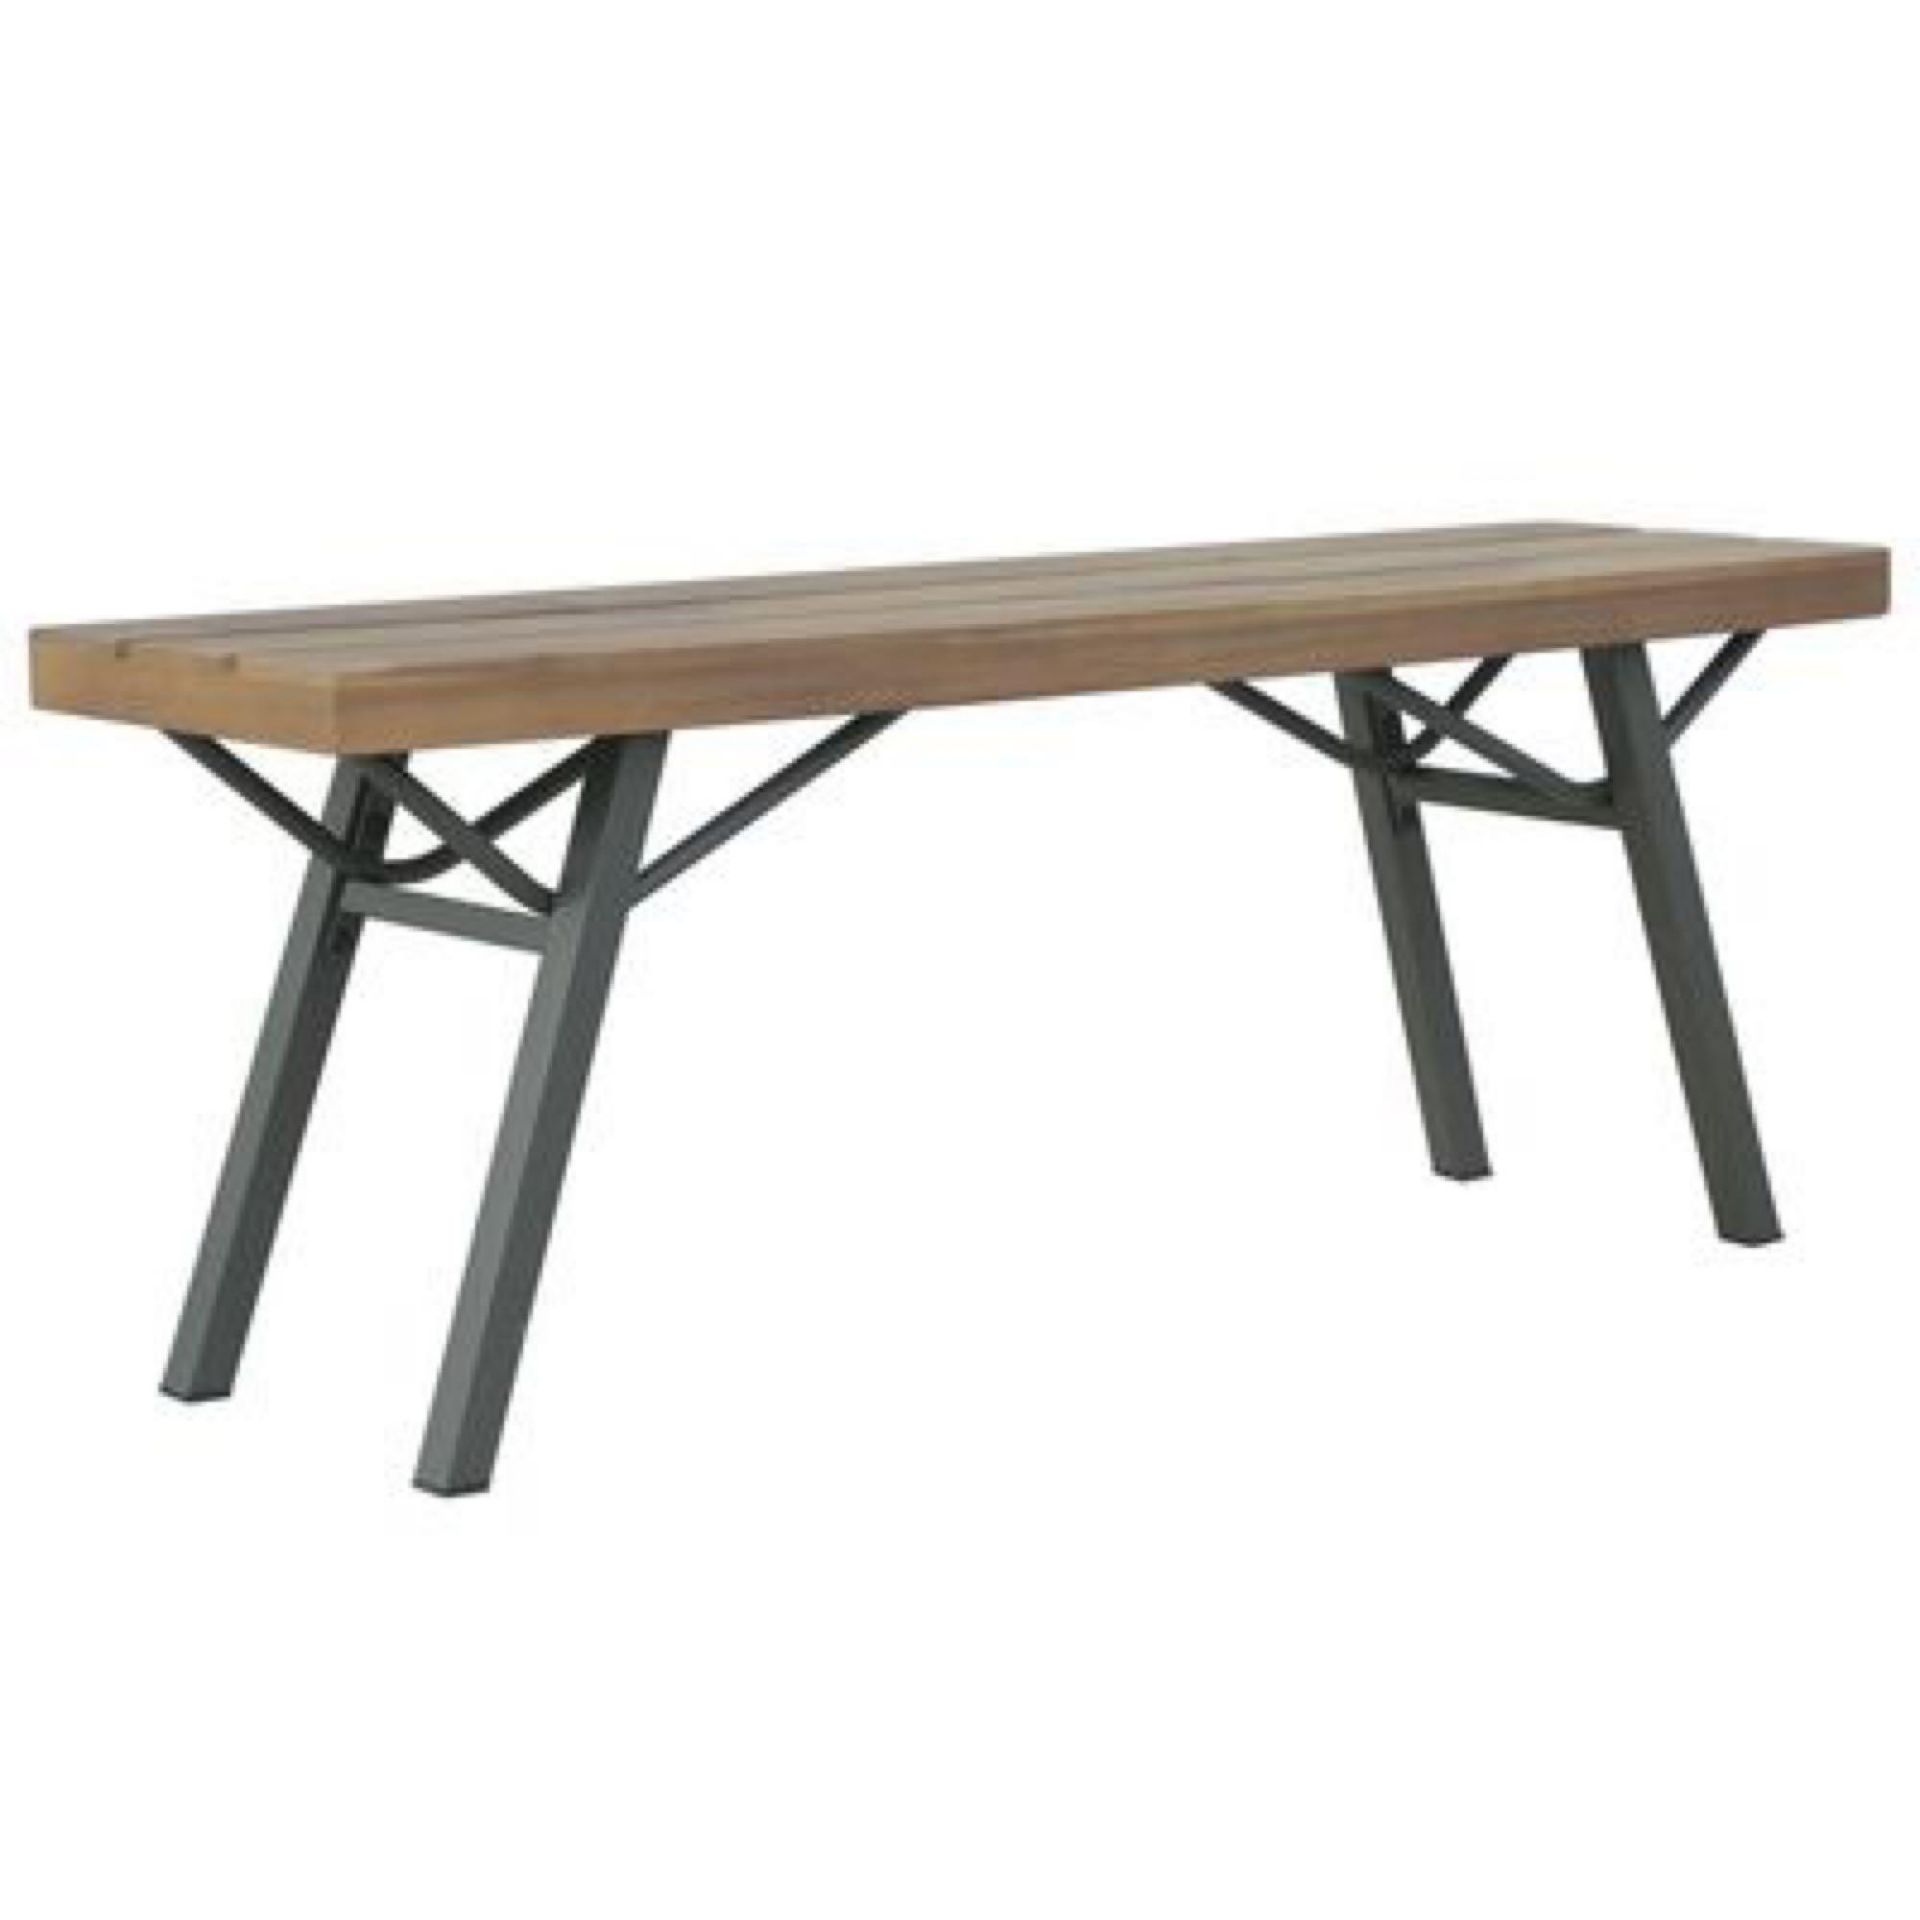 RRP £140 Unboxed Large Solid Wooden Bench (Missing Legs)